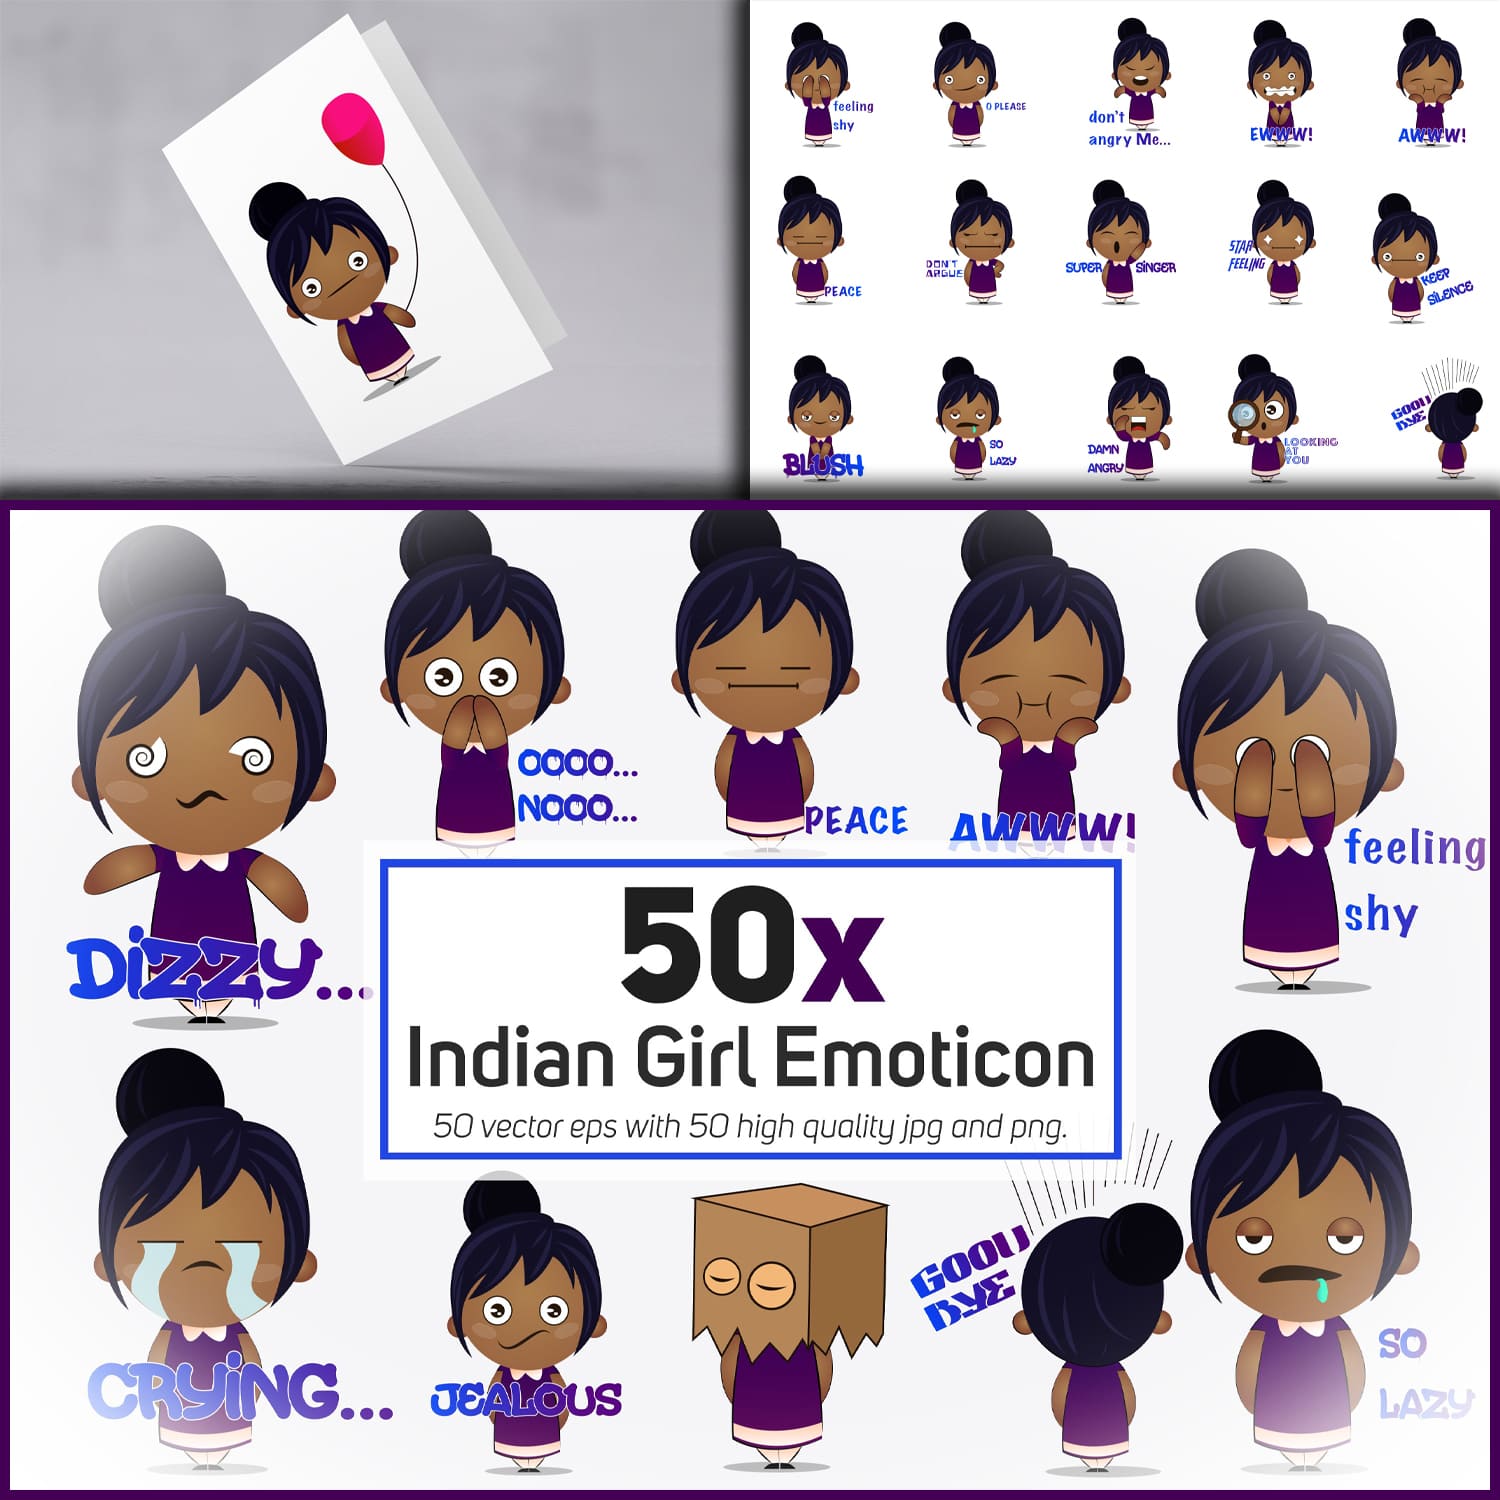 Preview 30x indian girl emoticon or stickers character col.